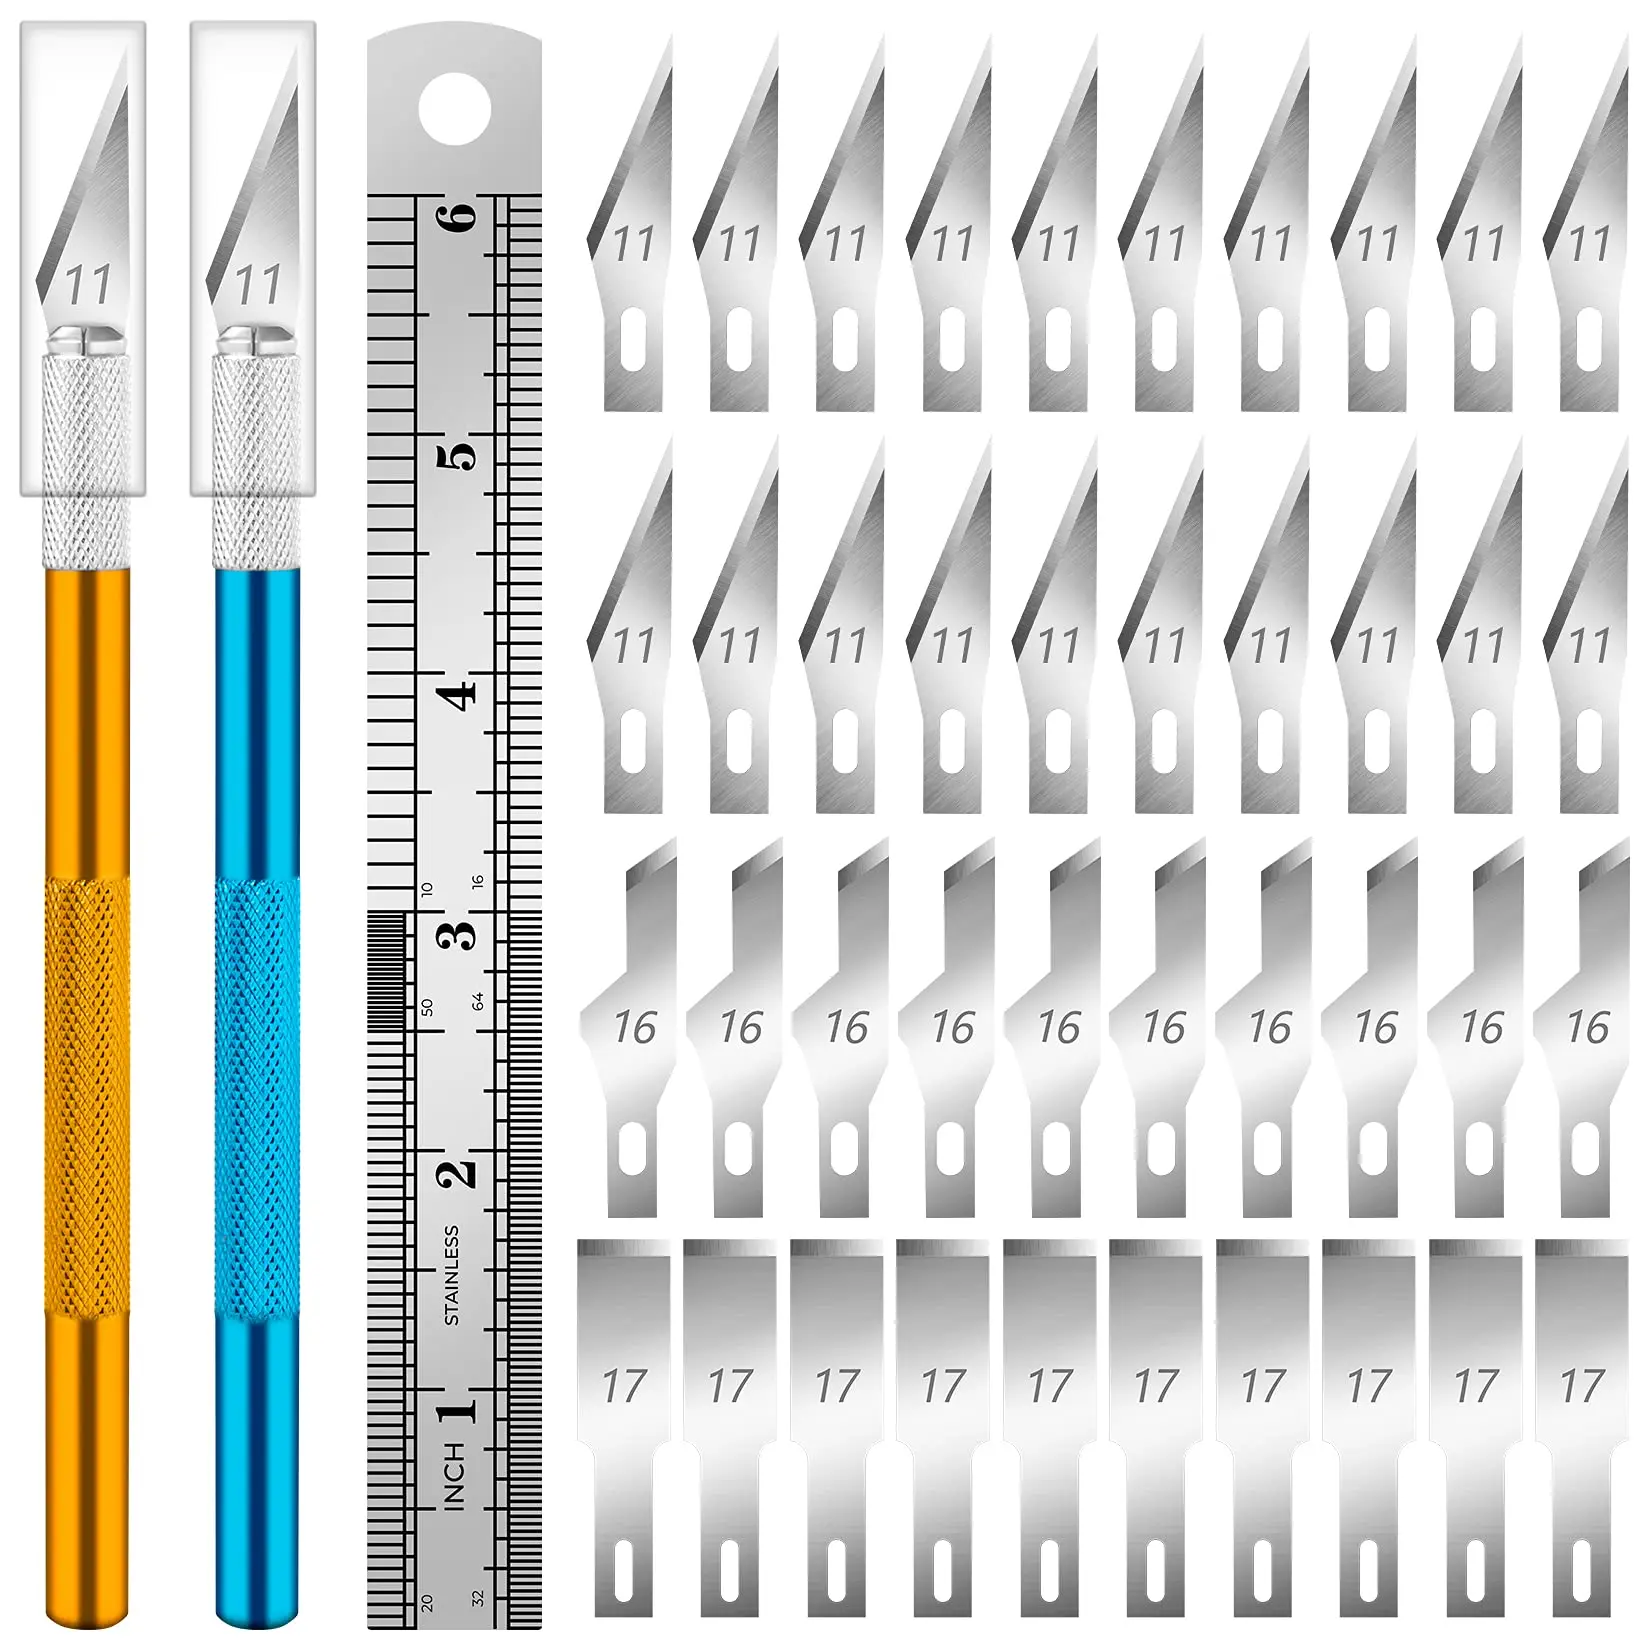 43Pcs Precision Exacto Hobby Craft Knife Kit with 40 Carving Blades, 2 Handles, 1 Ruler for DIY Artwork Scrapbooking Stencil